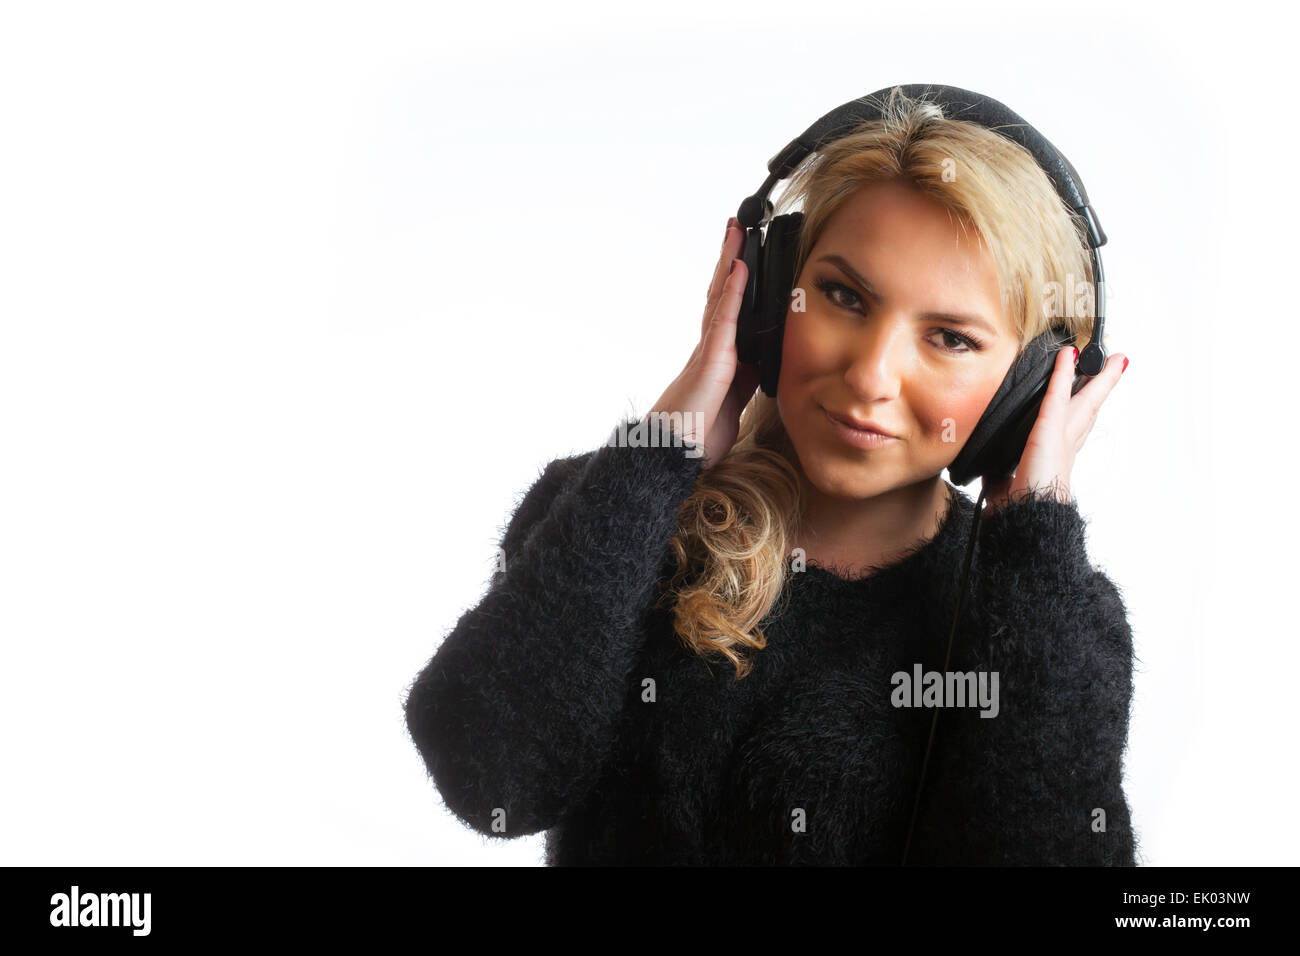 A pretty, blonde, Latina girl wearing large studio headphones and listening to music. Isolated on white background. Stock Photo